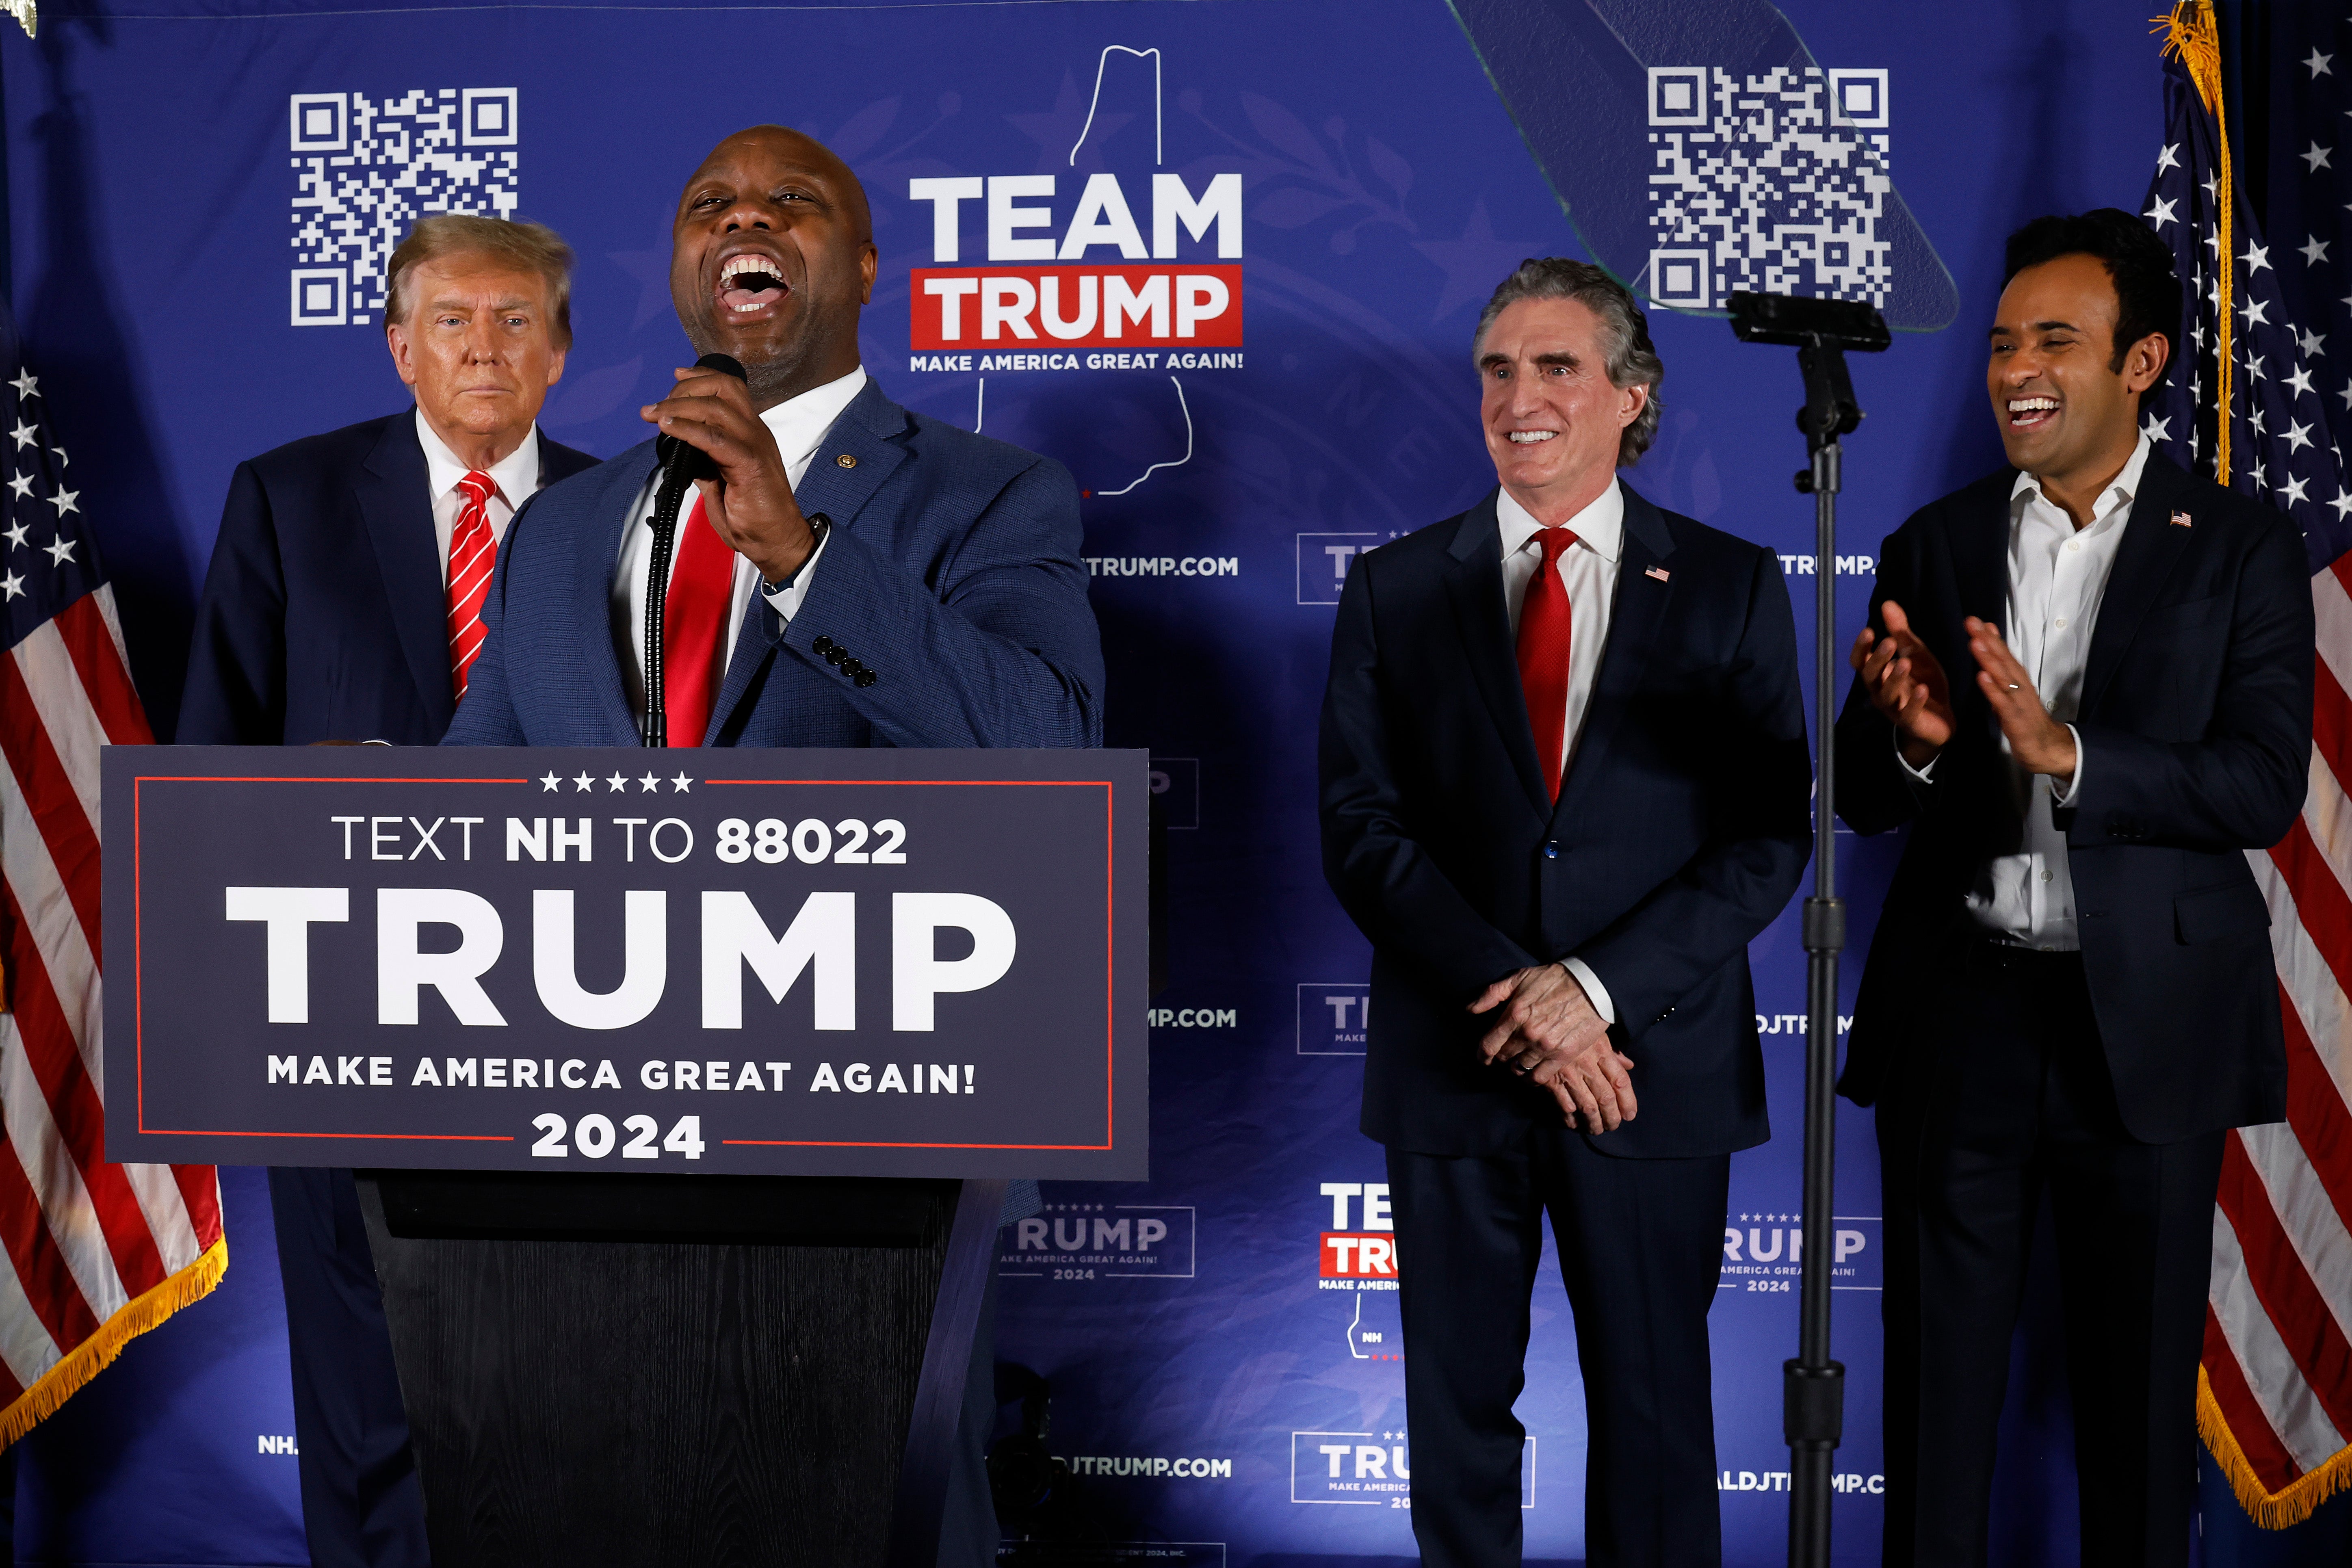 Tim Scott, Doug Burgum, and Vivek Ramaswamy attend an event for Donald Trump ahead of the New Hampshire primary in January 2024